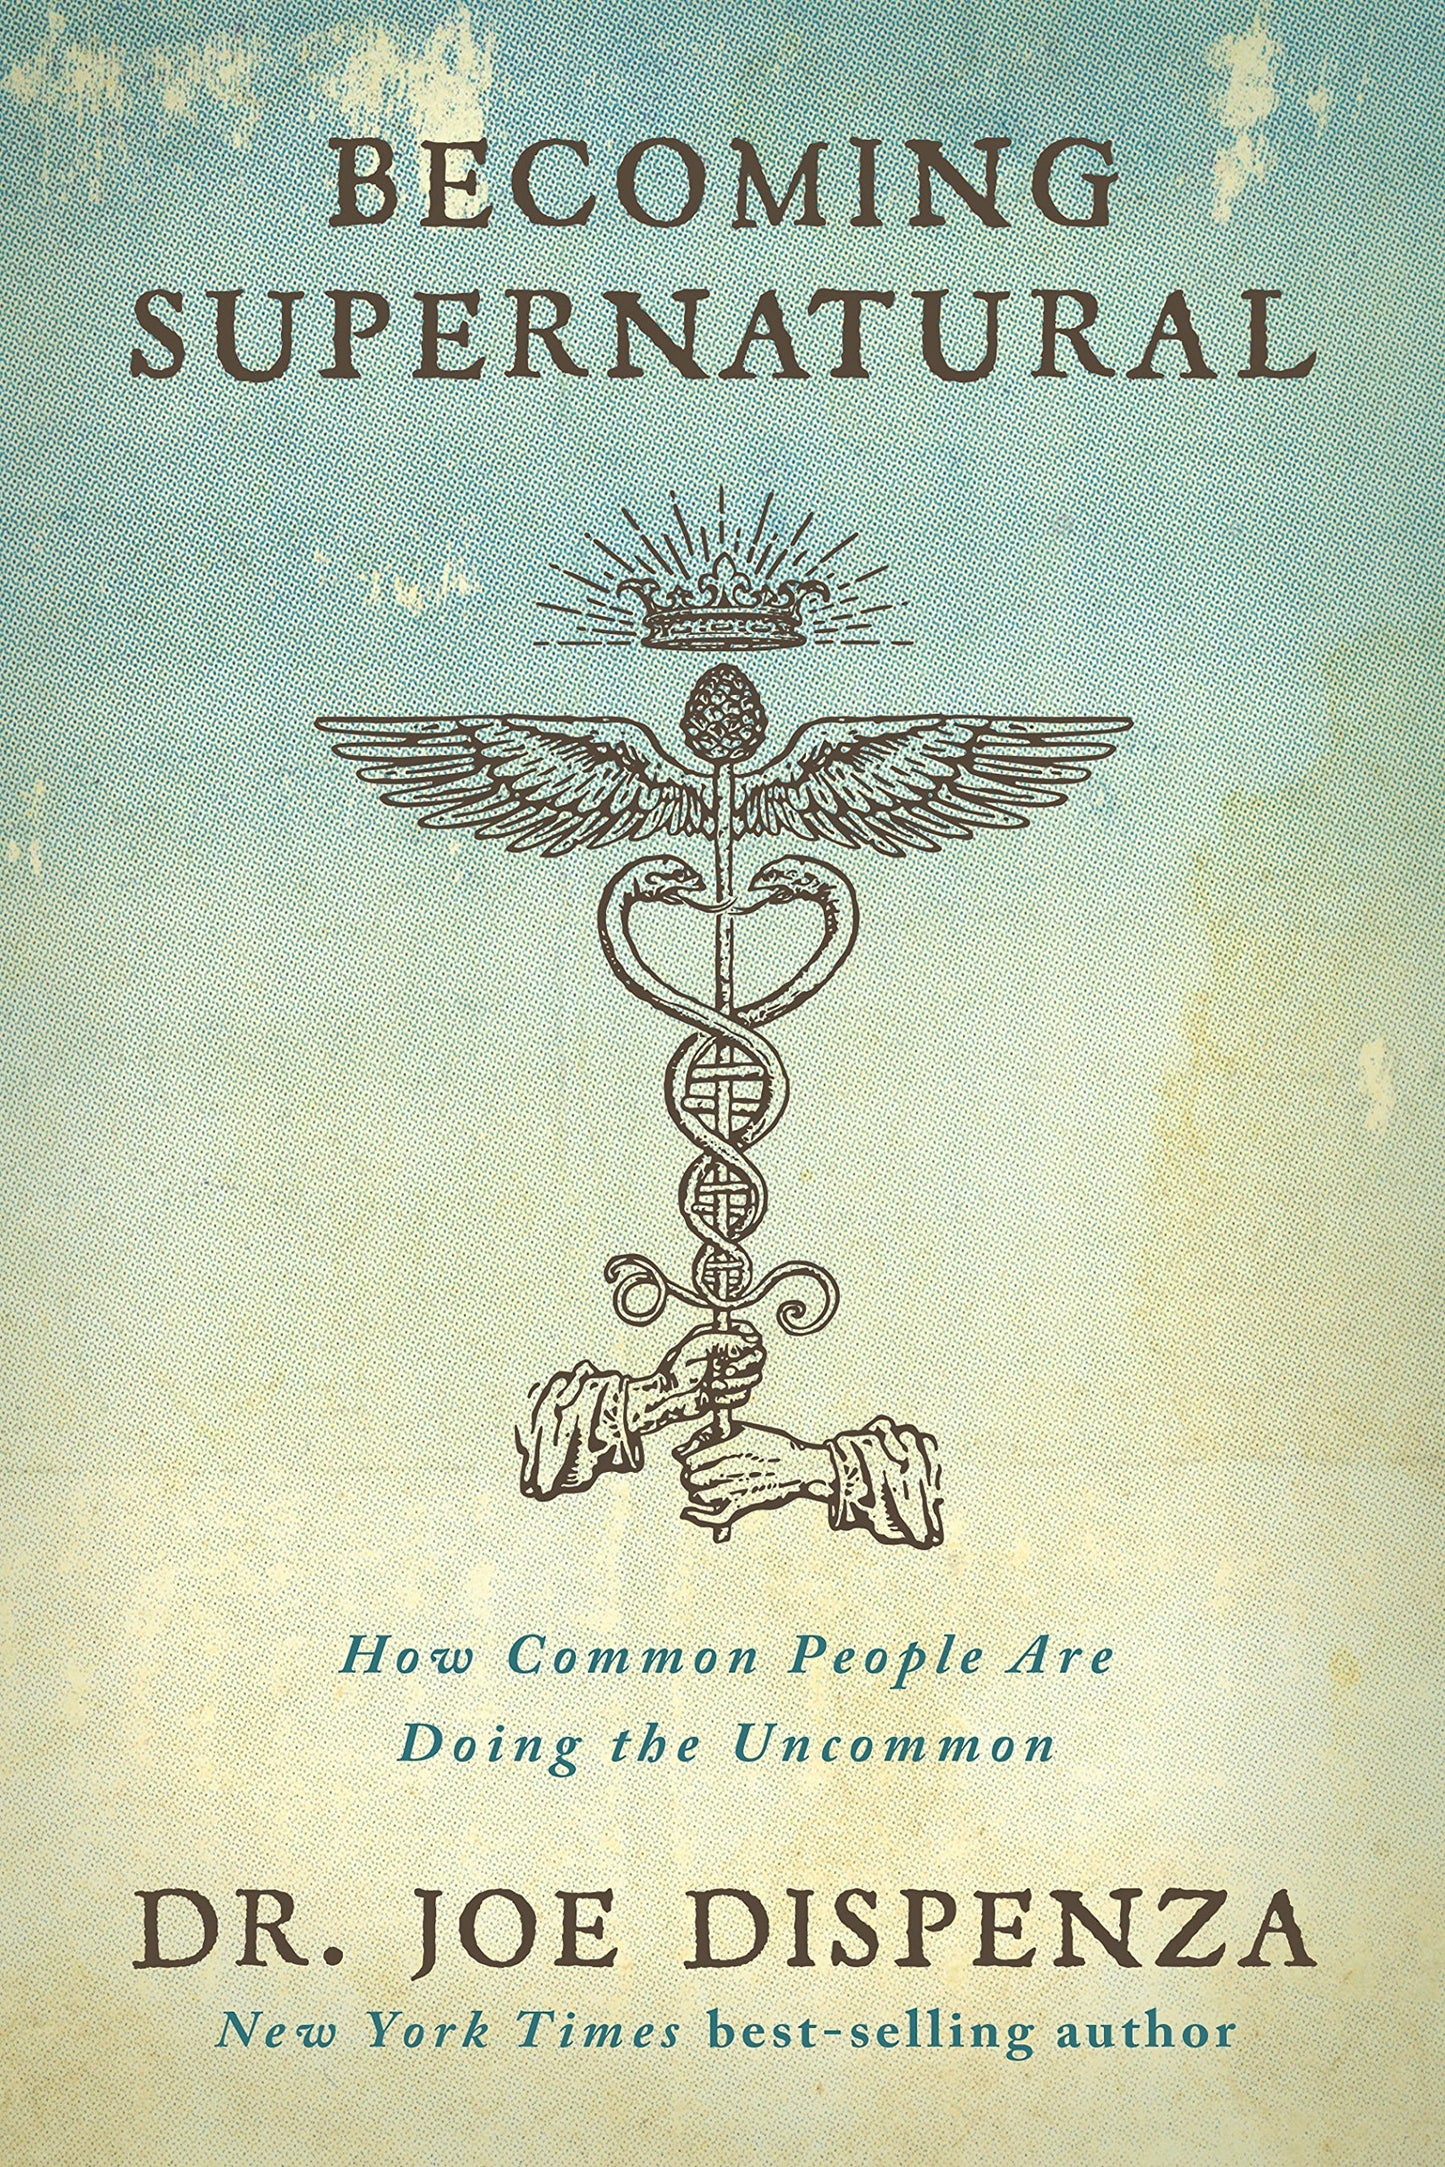 Becoming Supernatural: How Common People Are Doing the Uncommon by Joe Dr. Dispenza